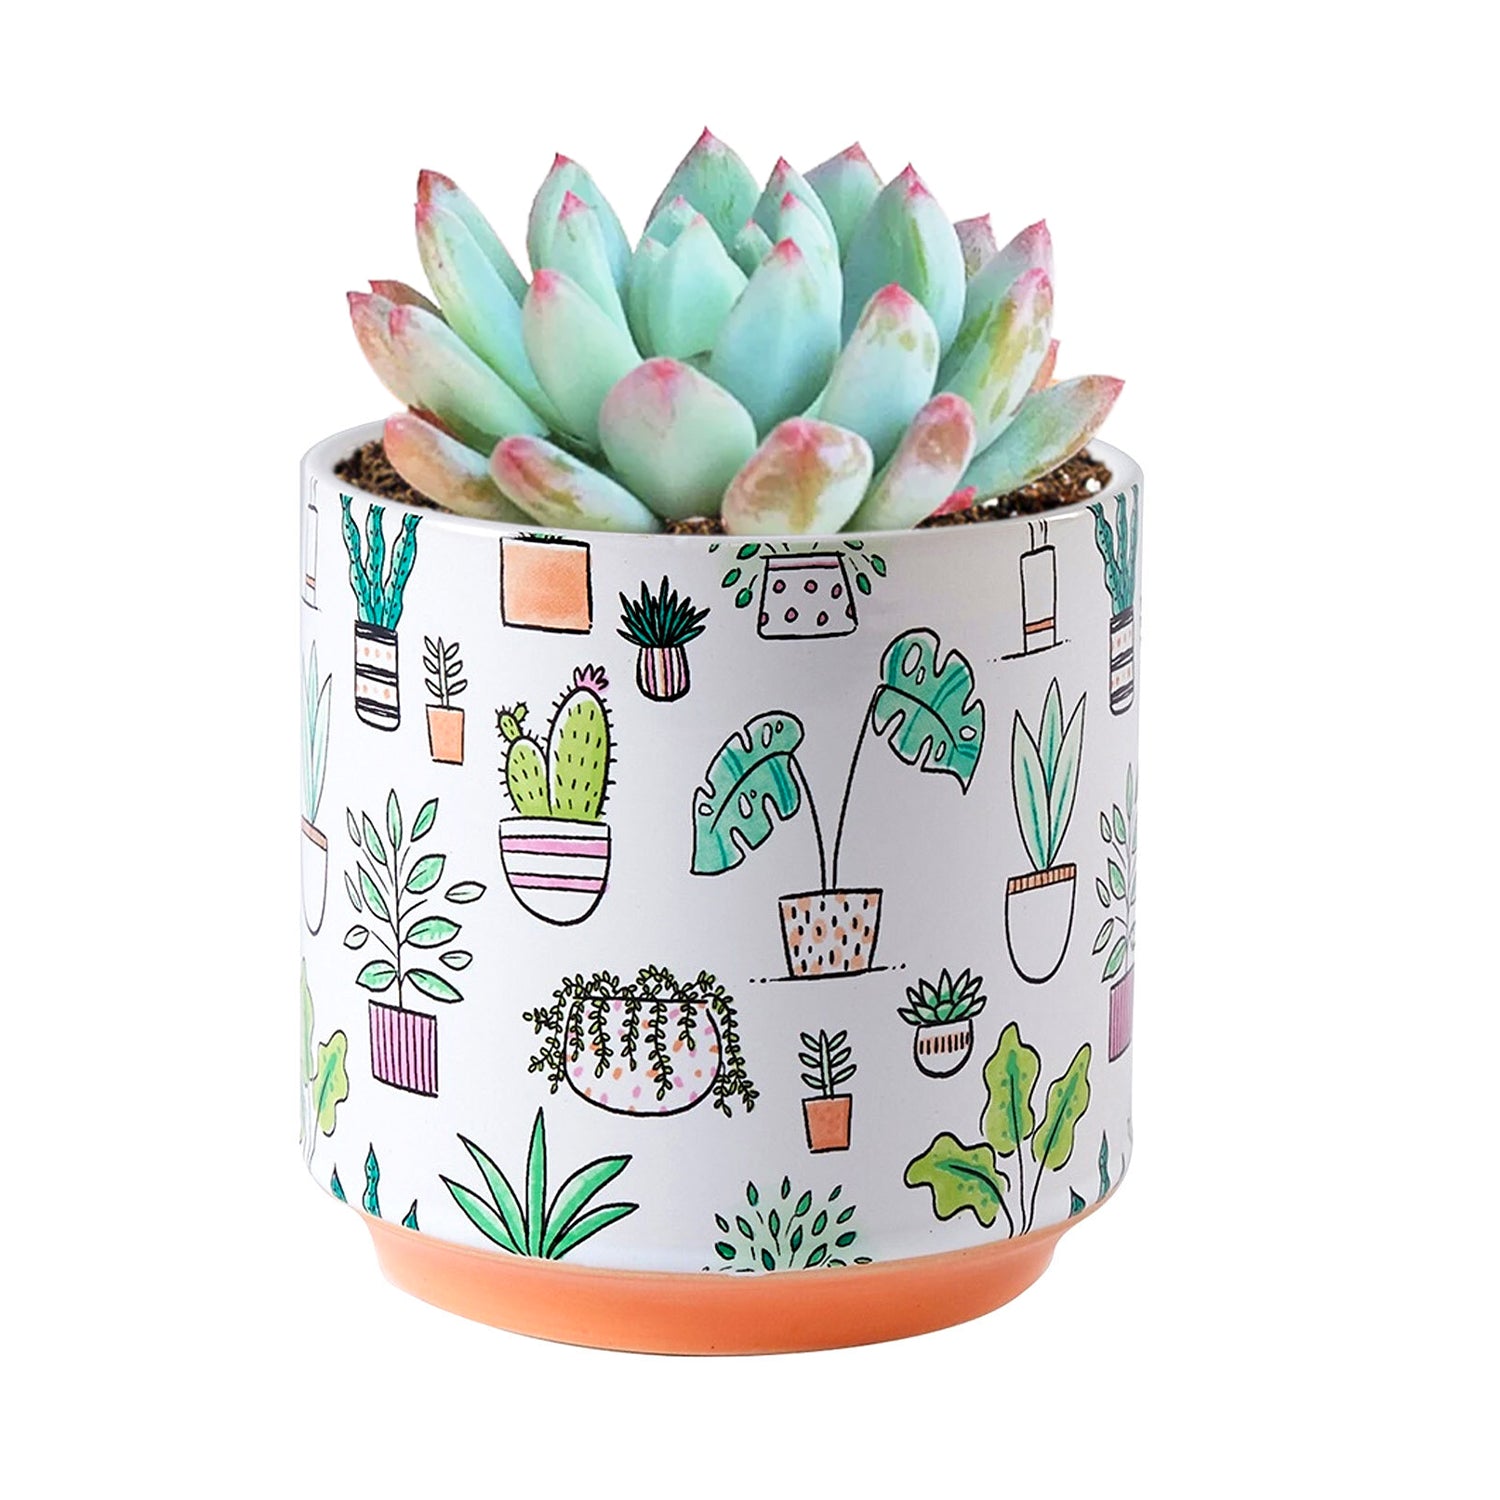 3 inch Houseplant Pattern Pot, cute pots for succulents and cacti, white ceramic pots, 3 inch pots with cute pattern for indoor plants